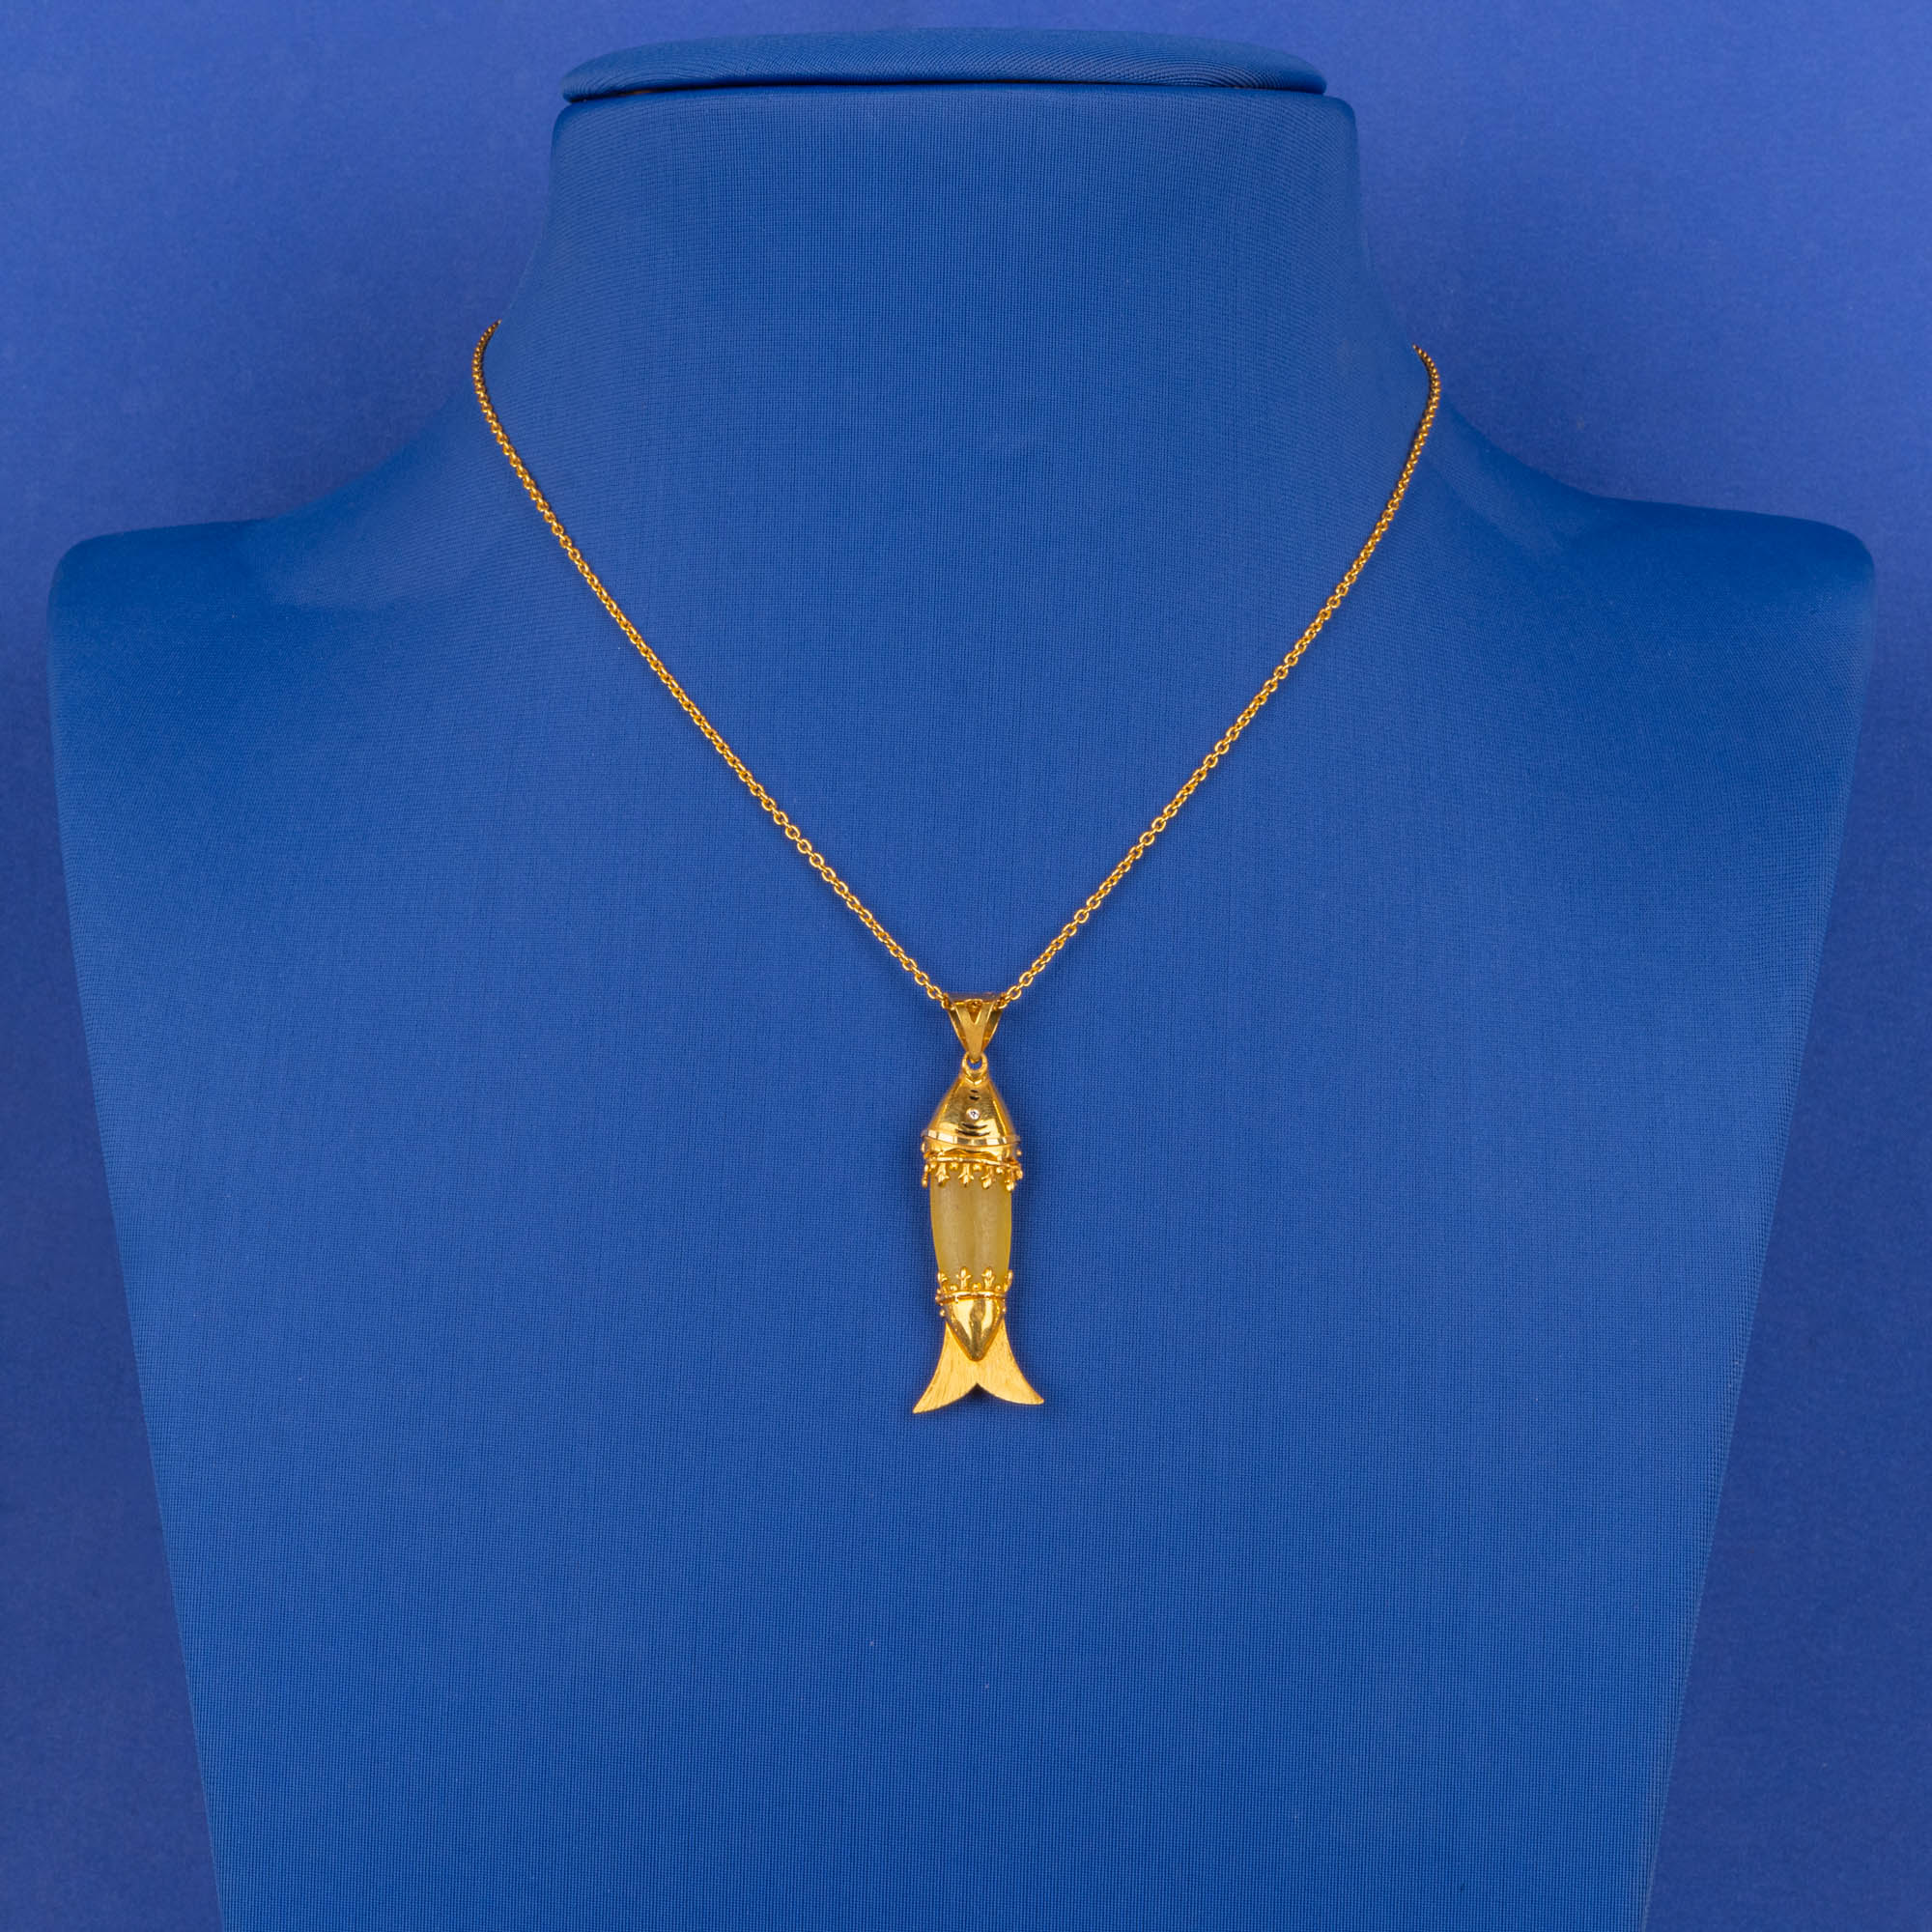 Aquatic Elegance - Handmade 22K Yellow Gold Sikh Khanda Pendant with Exquisite Detailing (chain not included)